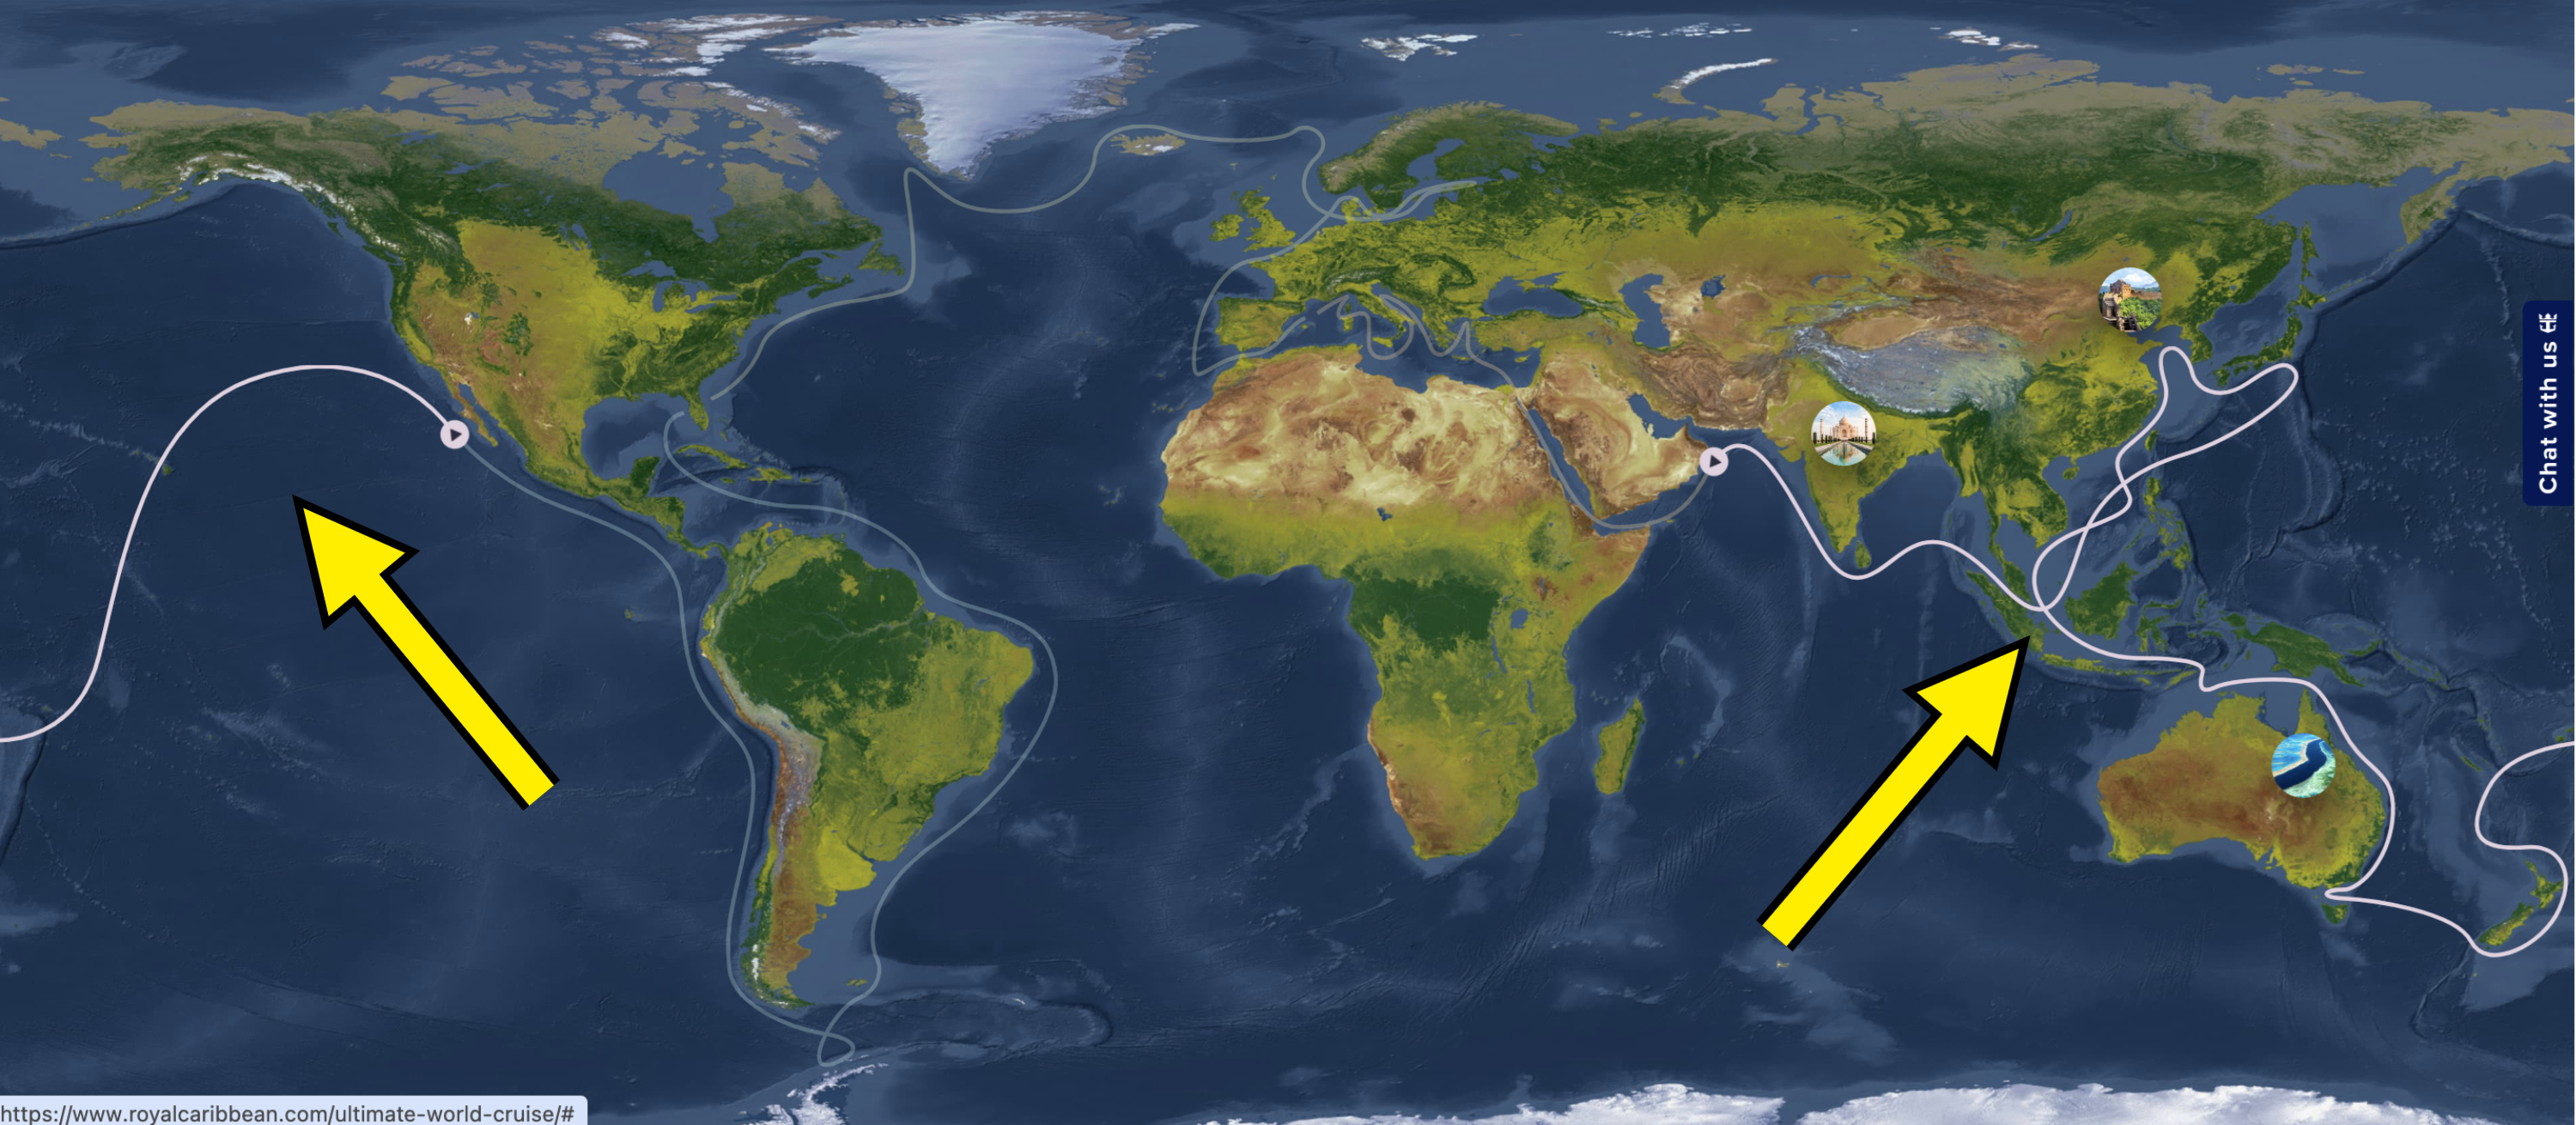 Arrows showing the second leg of the world cruise